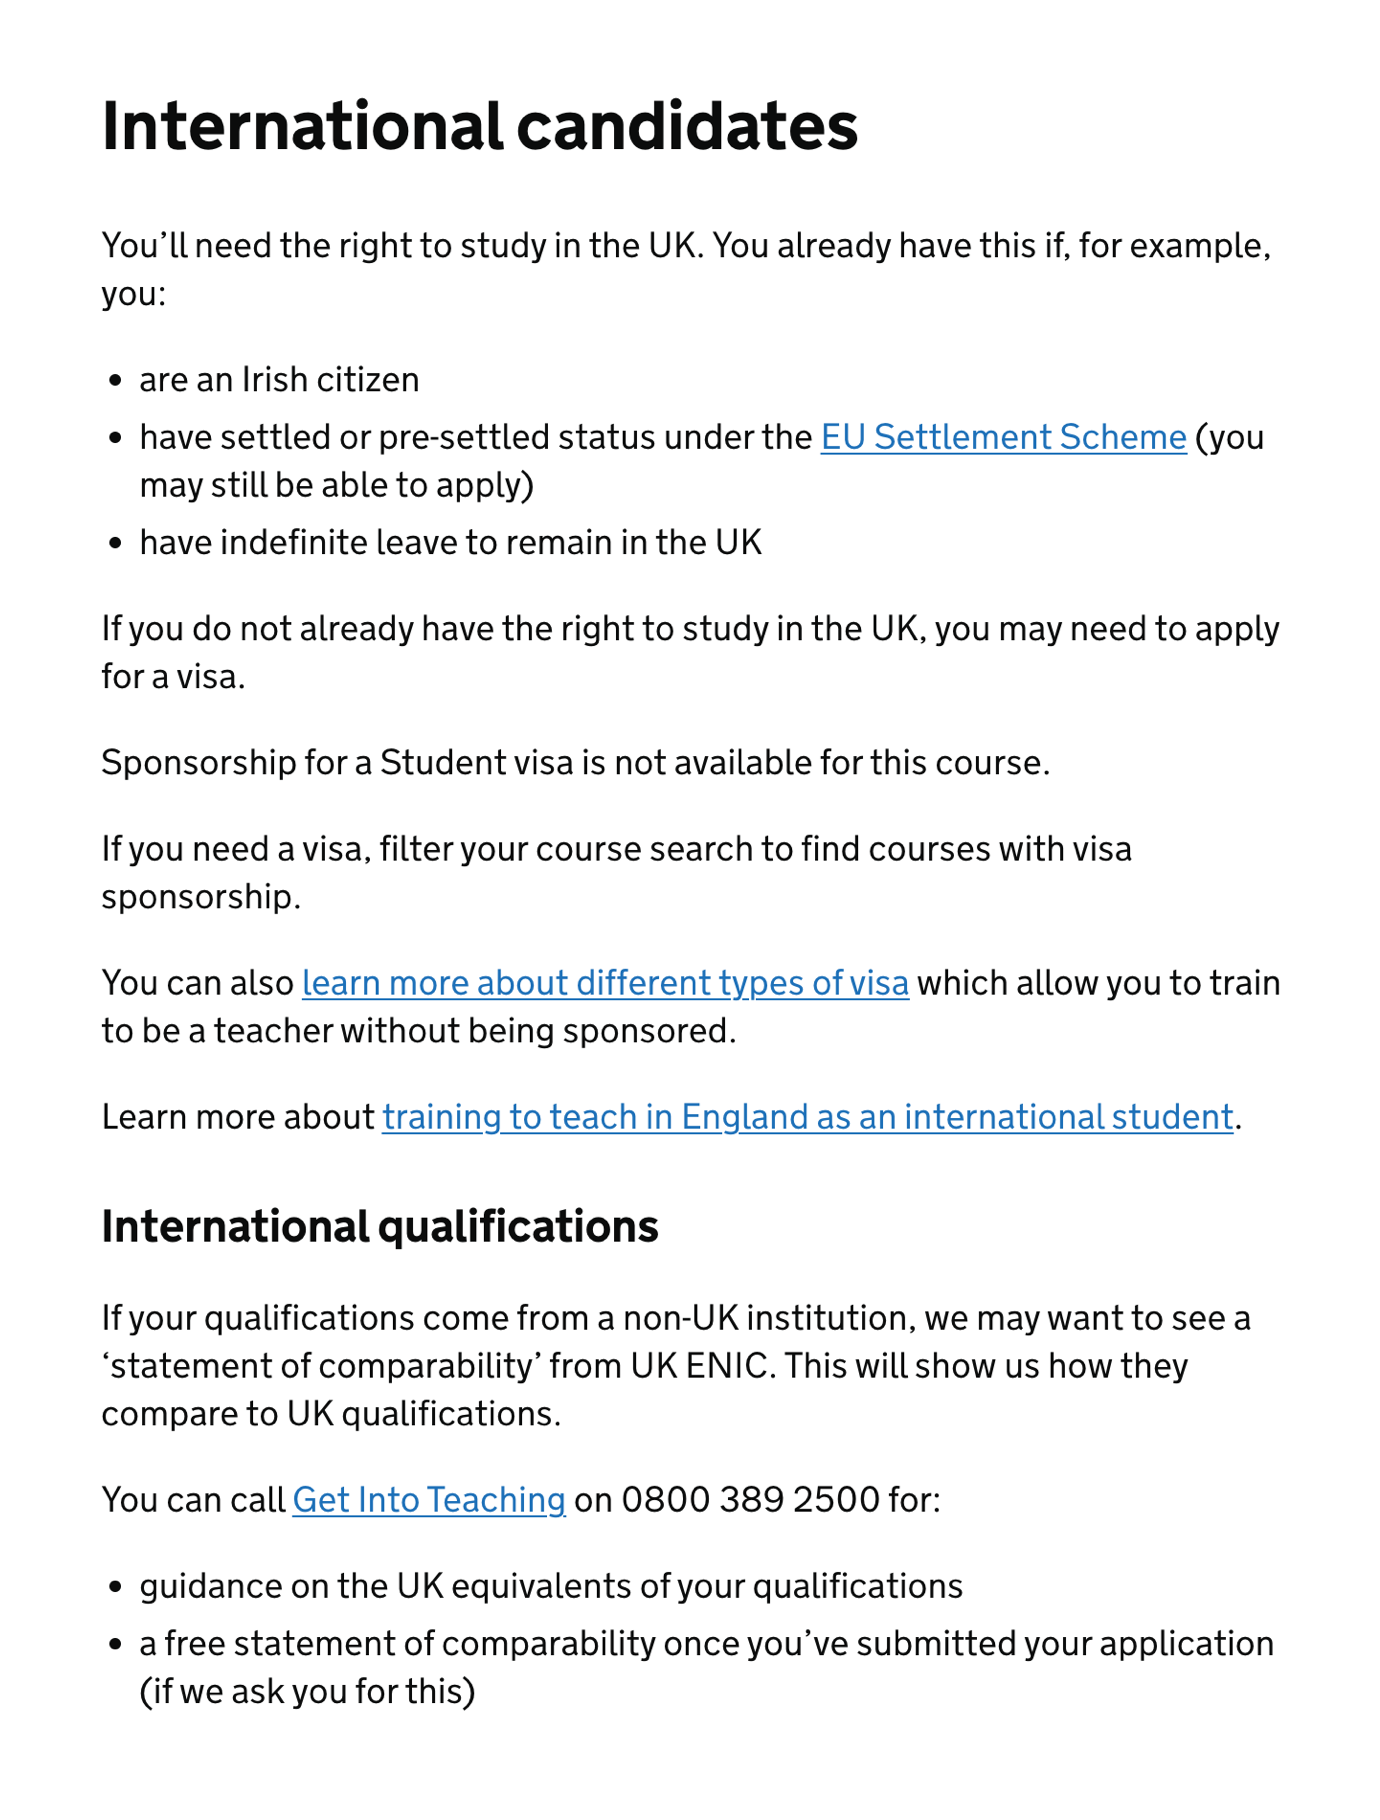 International candidates - fee-paying courses